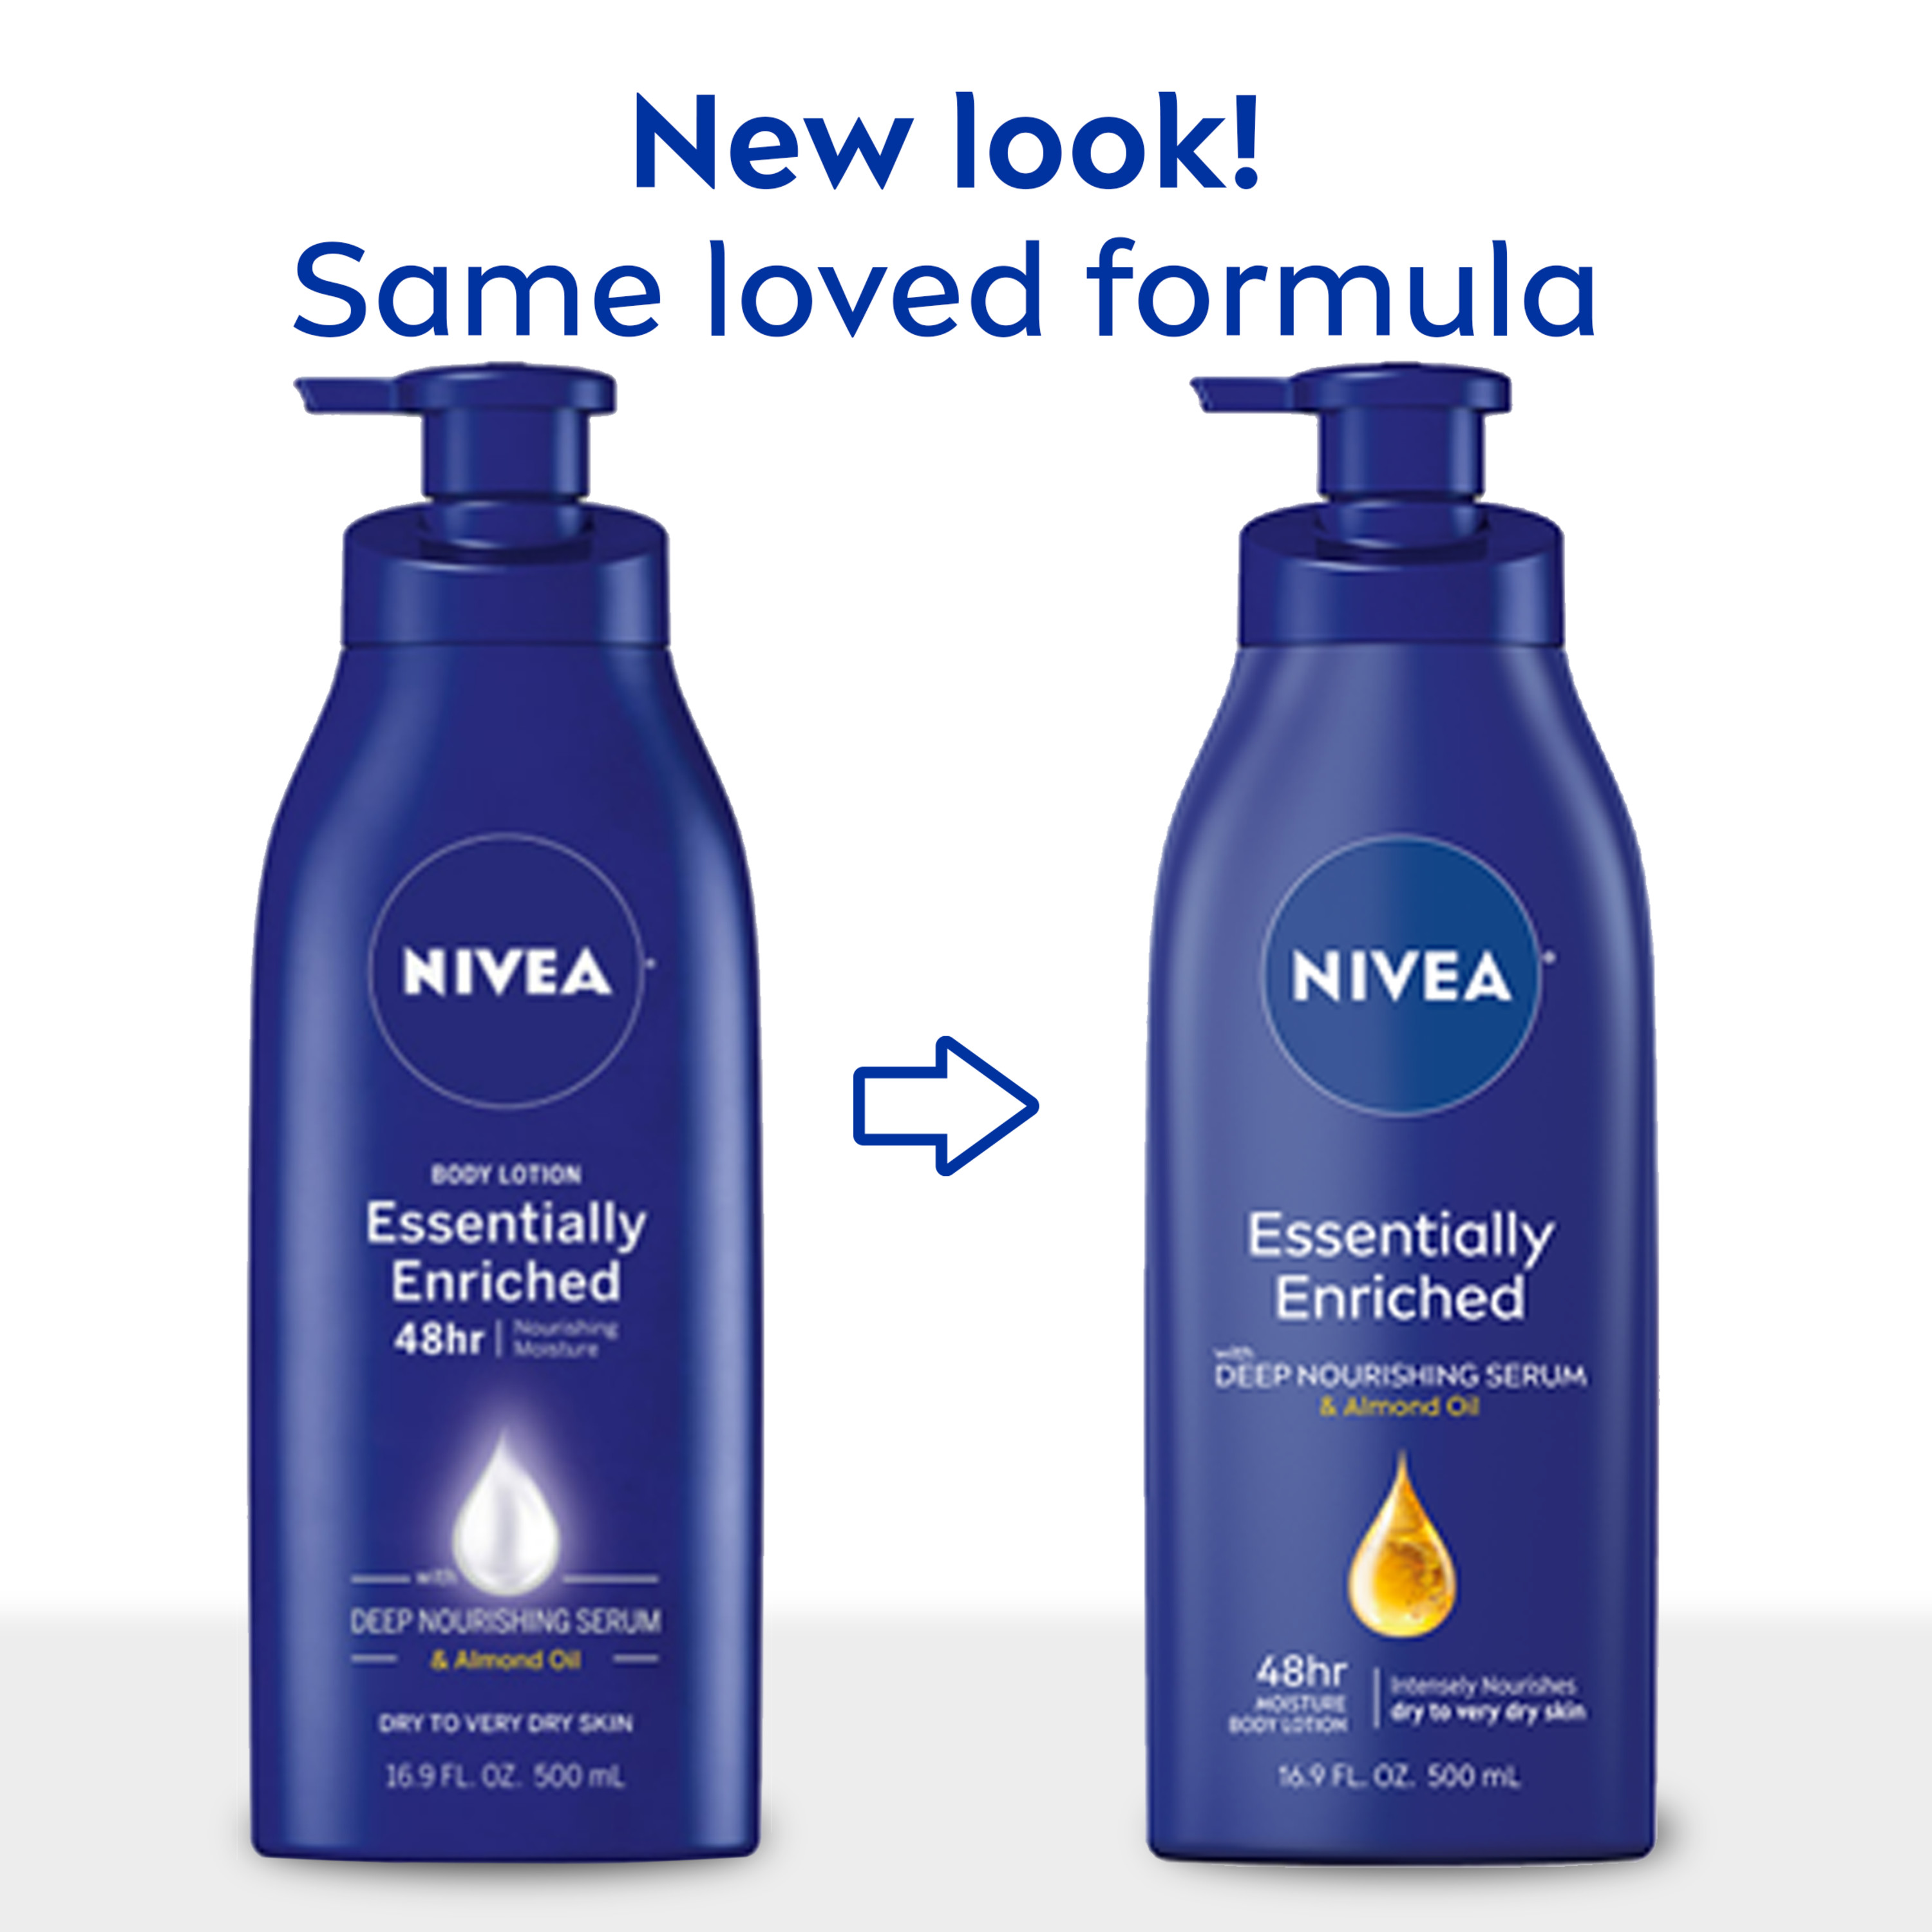 NIVEA Essentially Enriched Body Lotion for Dry Skin, 16.9 Fl Oz Pump Bottle - image 4 of 13